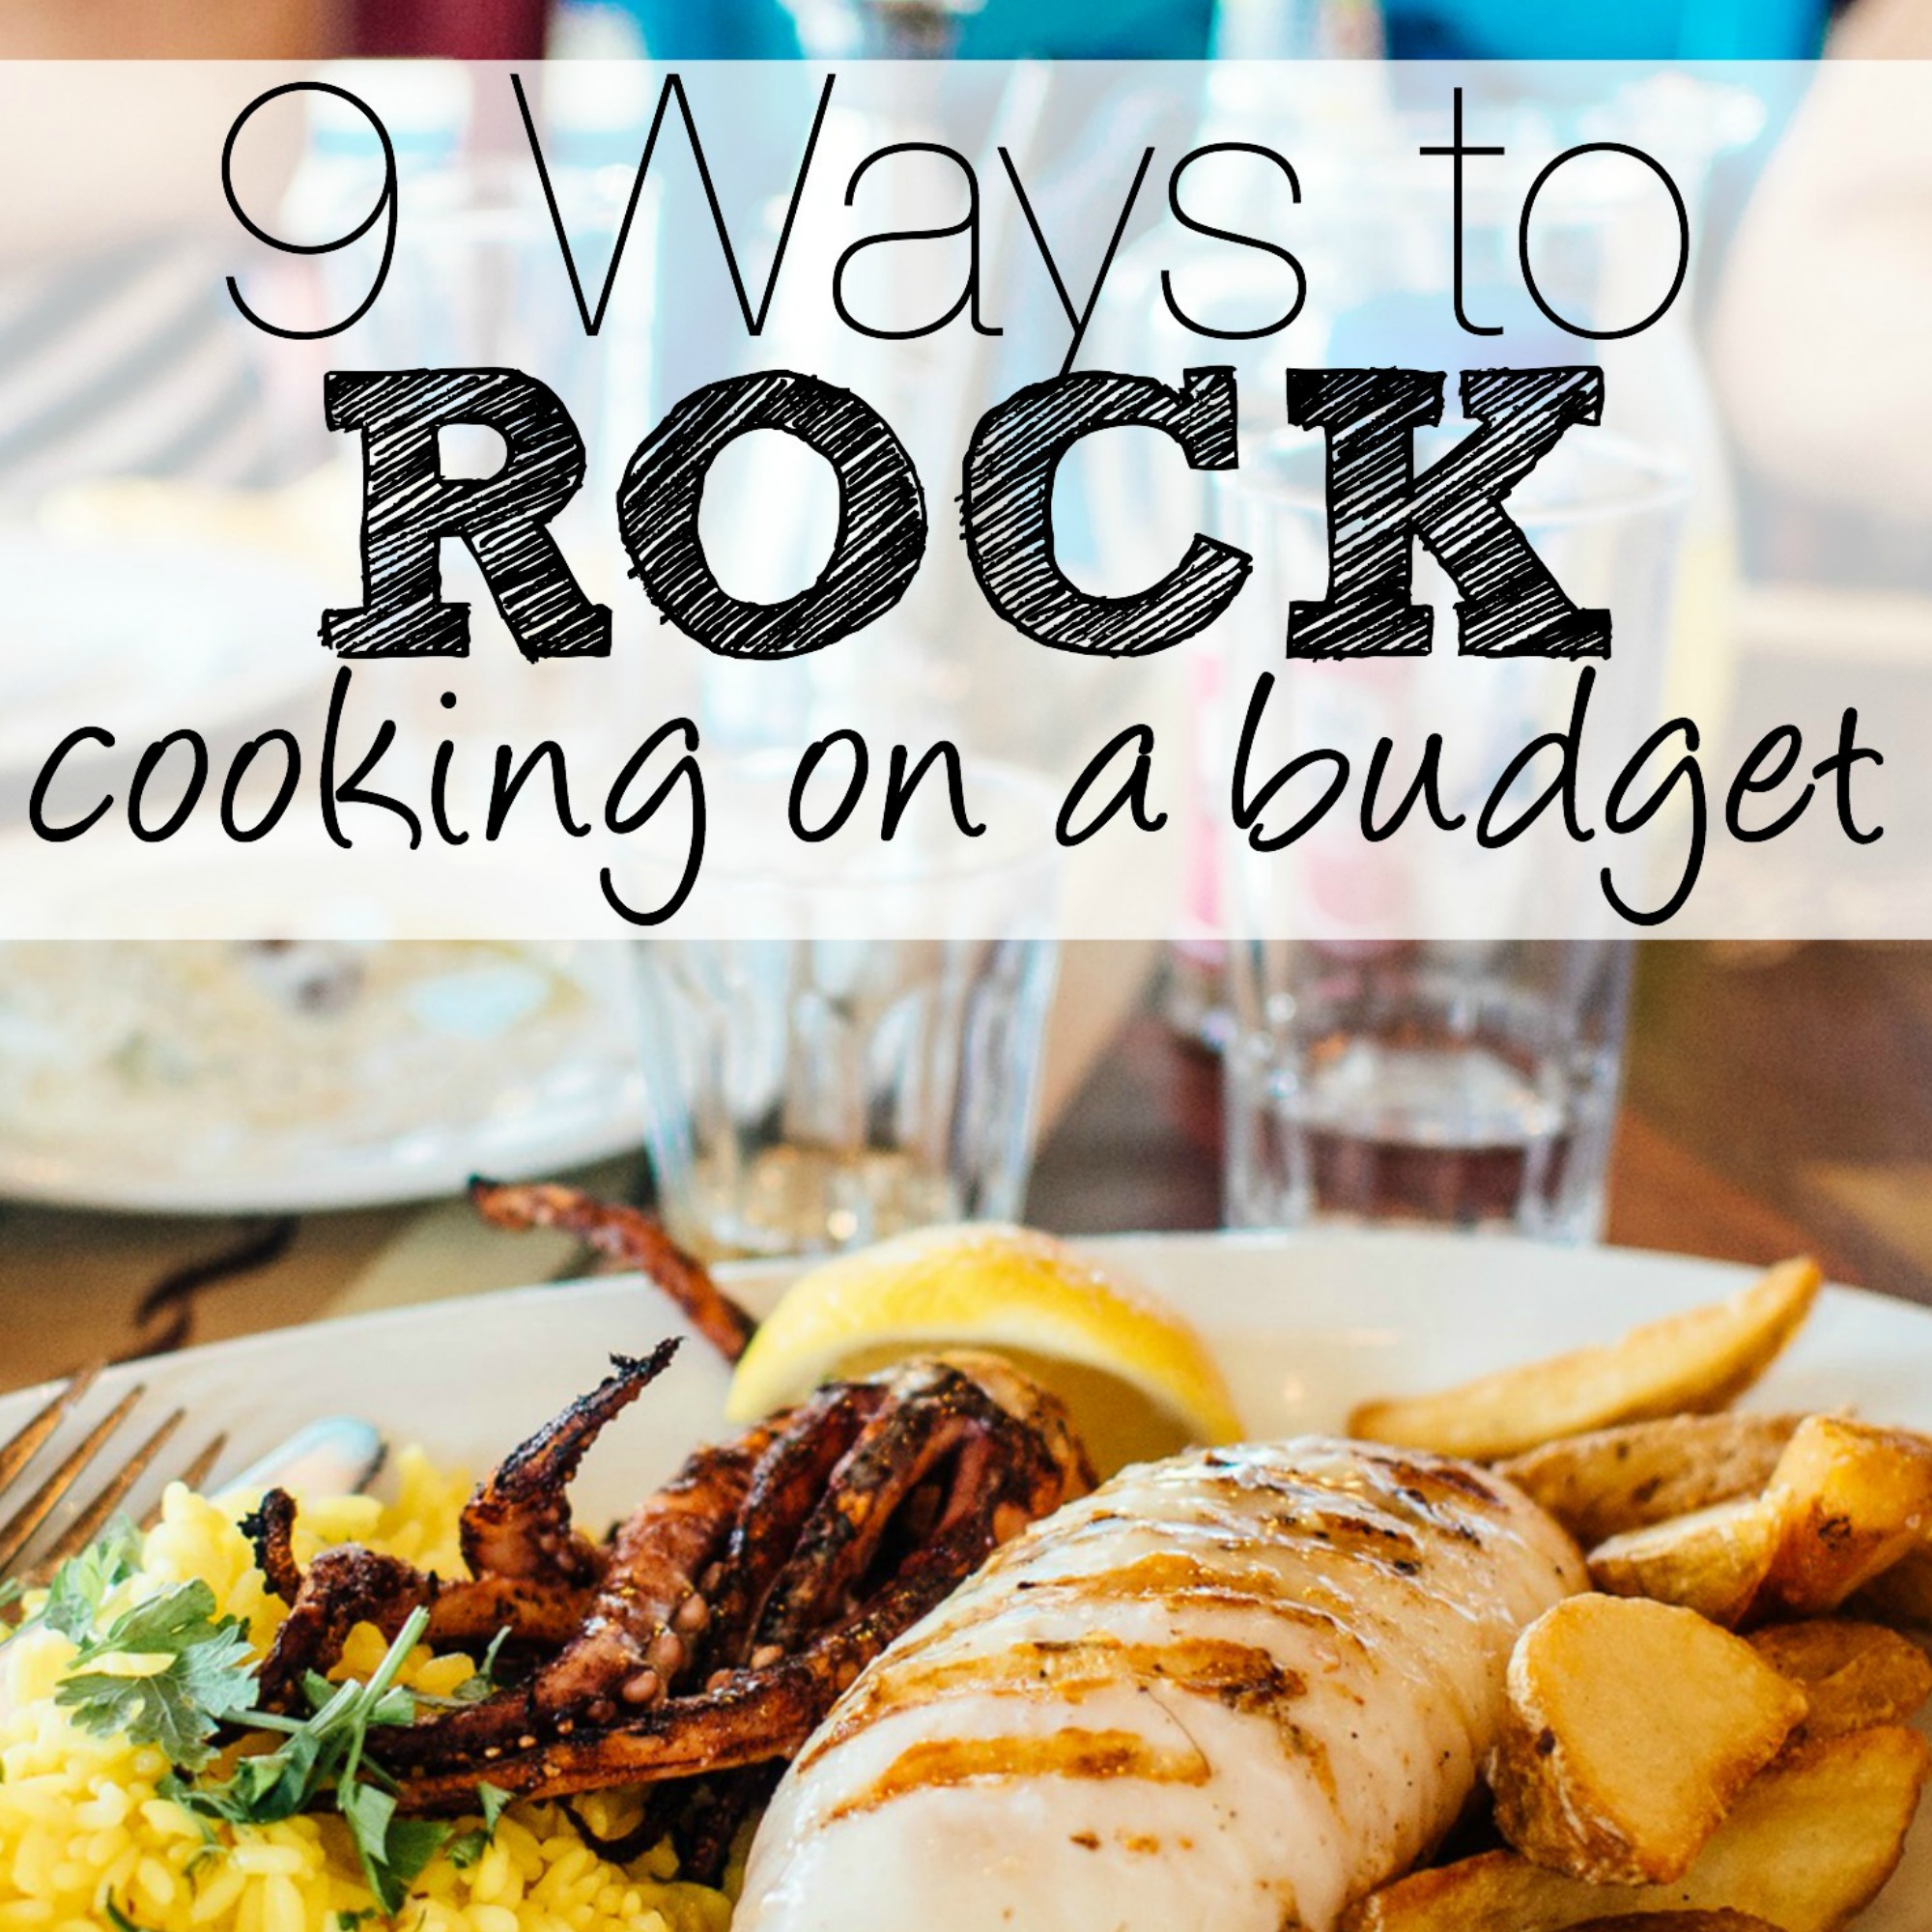 Family Cooking on a Budget - 9 Must Read Tips! https://couponcravings.com